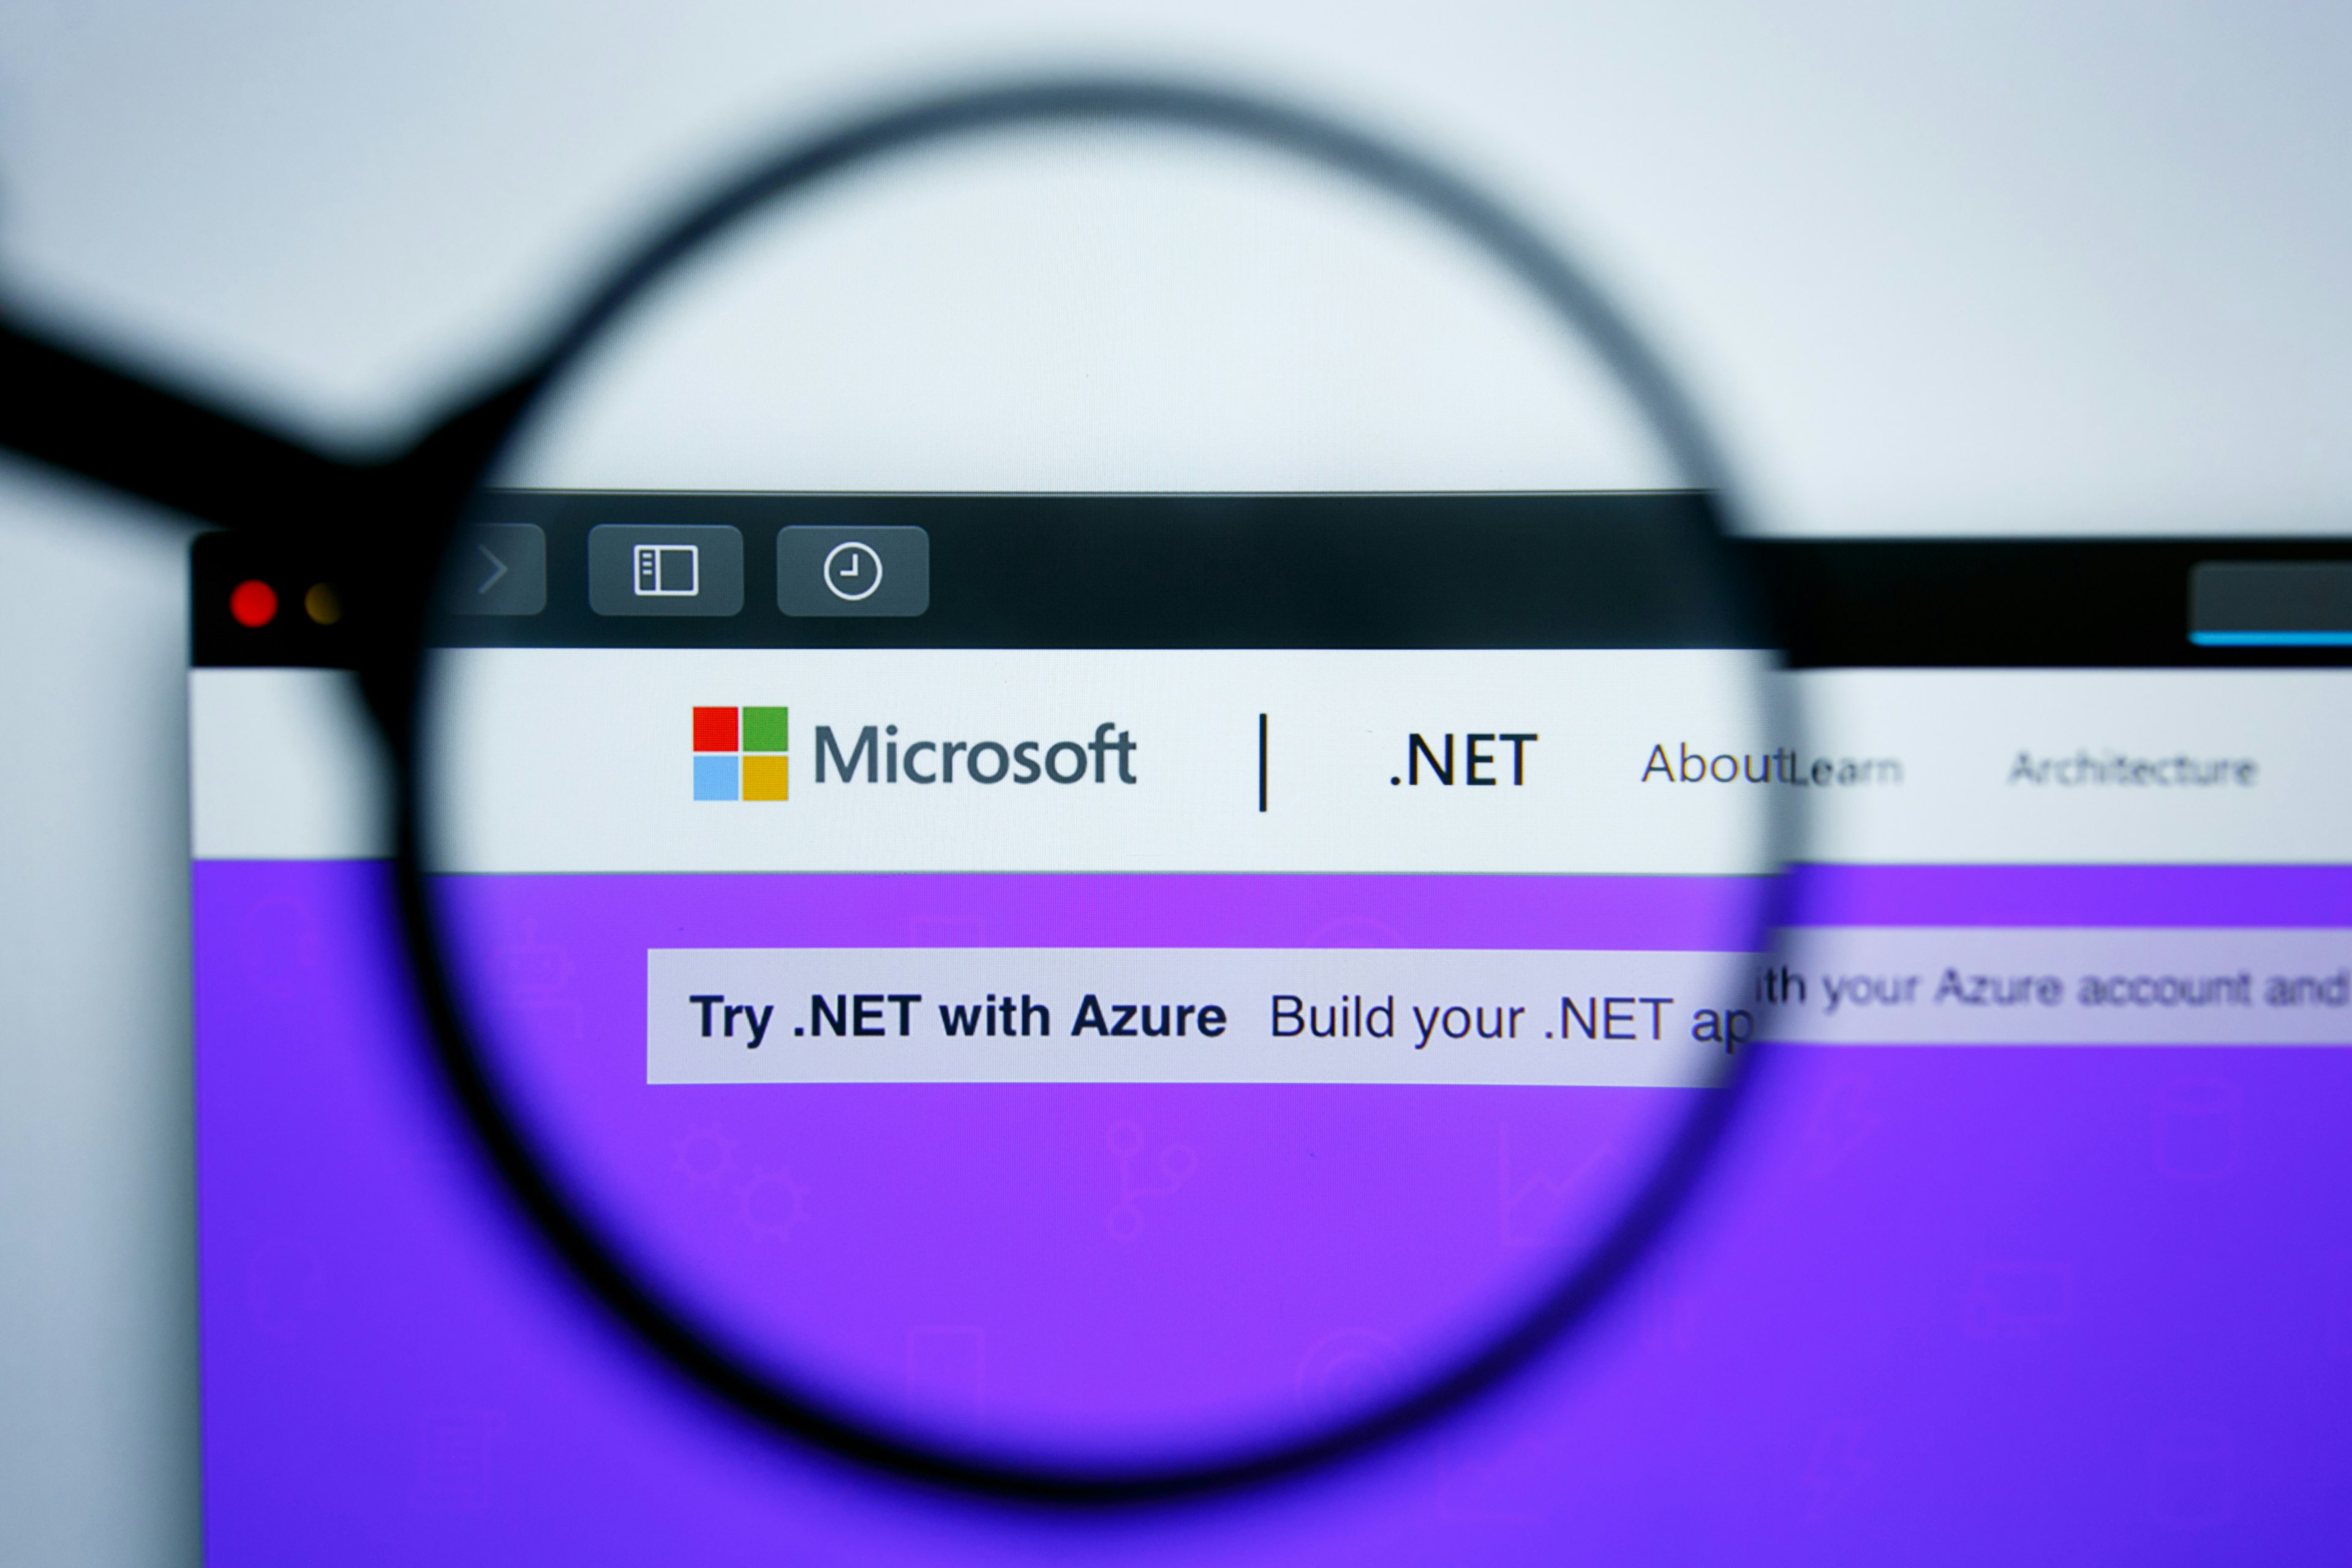 Over the last few years there has been a sustained effort to improve the cross-platform reach of the .NET Framework, with the release of .NET Core. However, this has resulted in non-uniform support for each platform, making the .NET Framework cumbersome to use